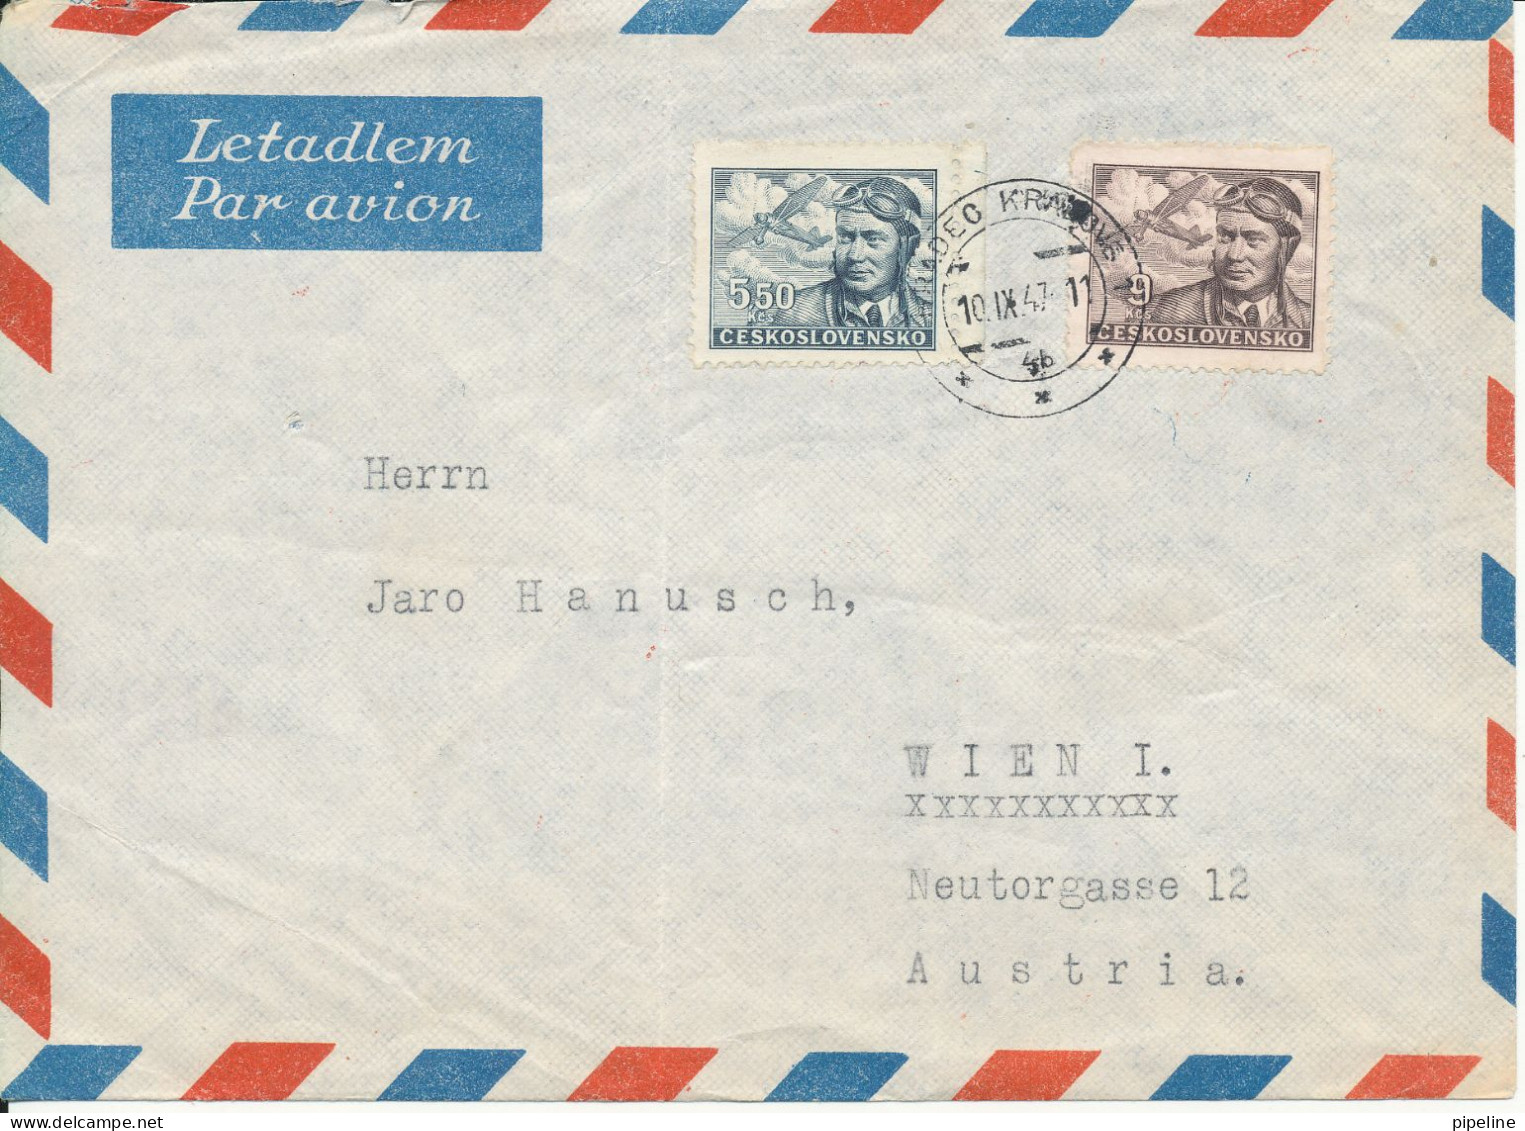 Czechoslovakia Air Mail Cover Sent To Denmark 10-9-1947 The Cover Is A Bit Folded And With Hinged Marks On The Backside - Airmail